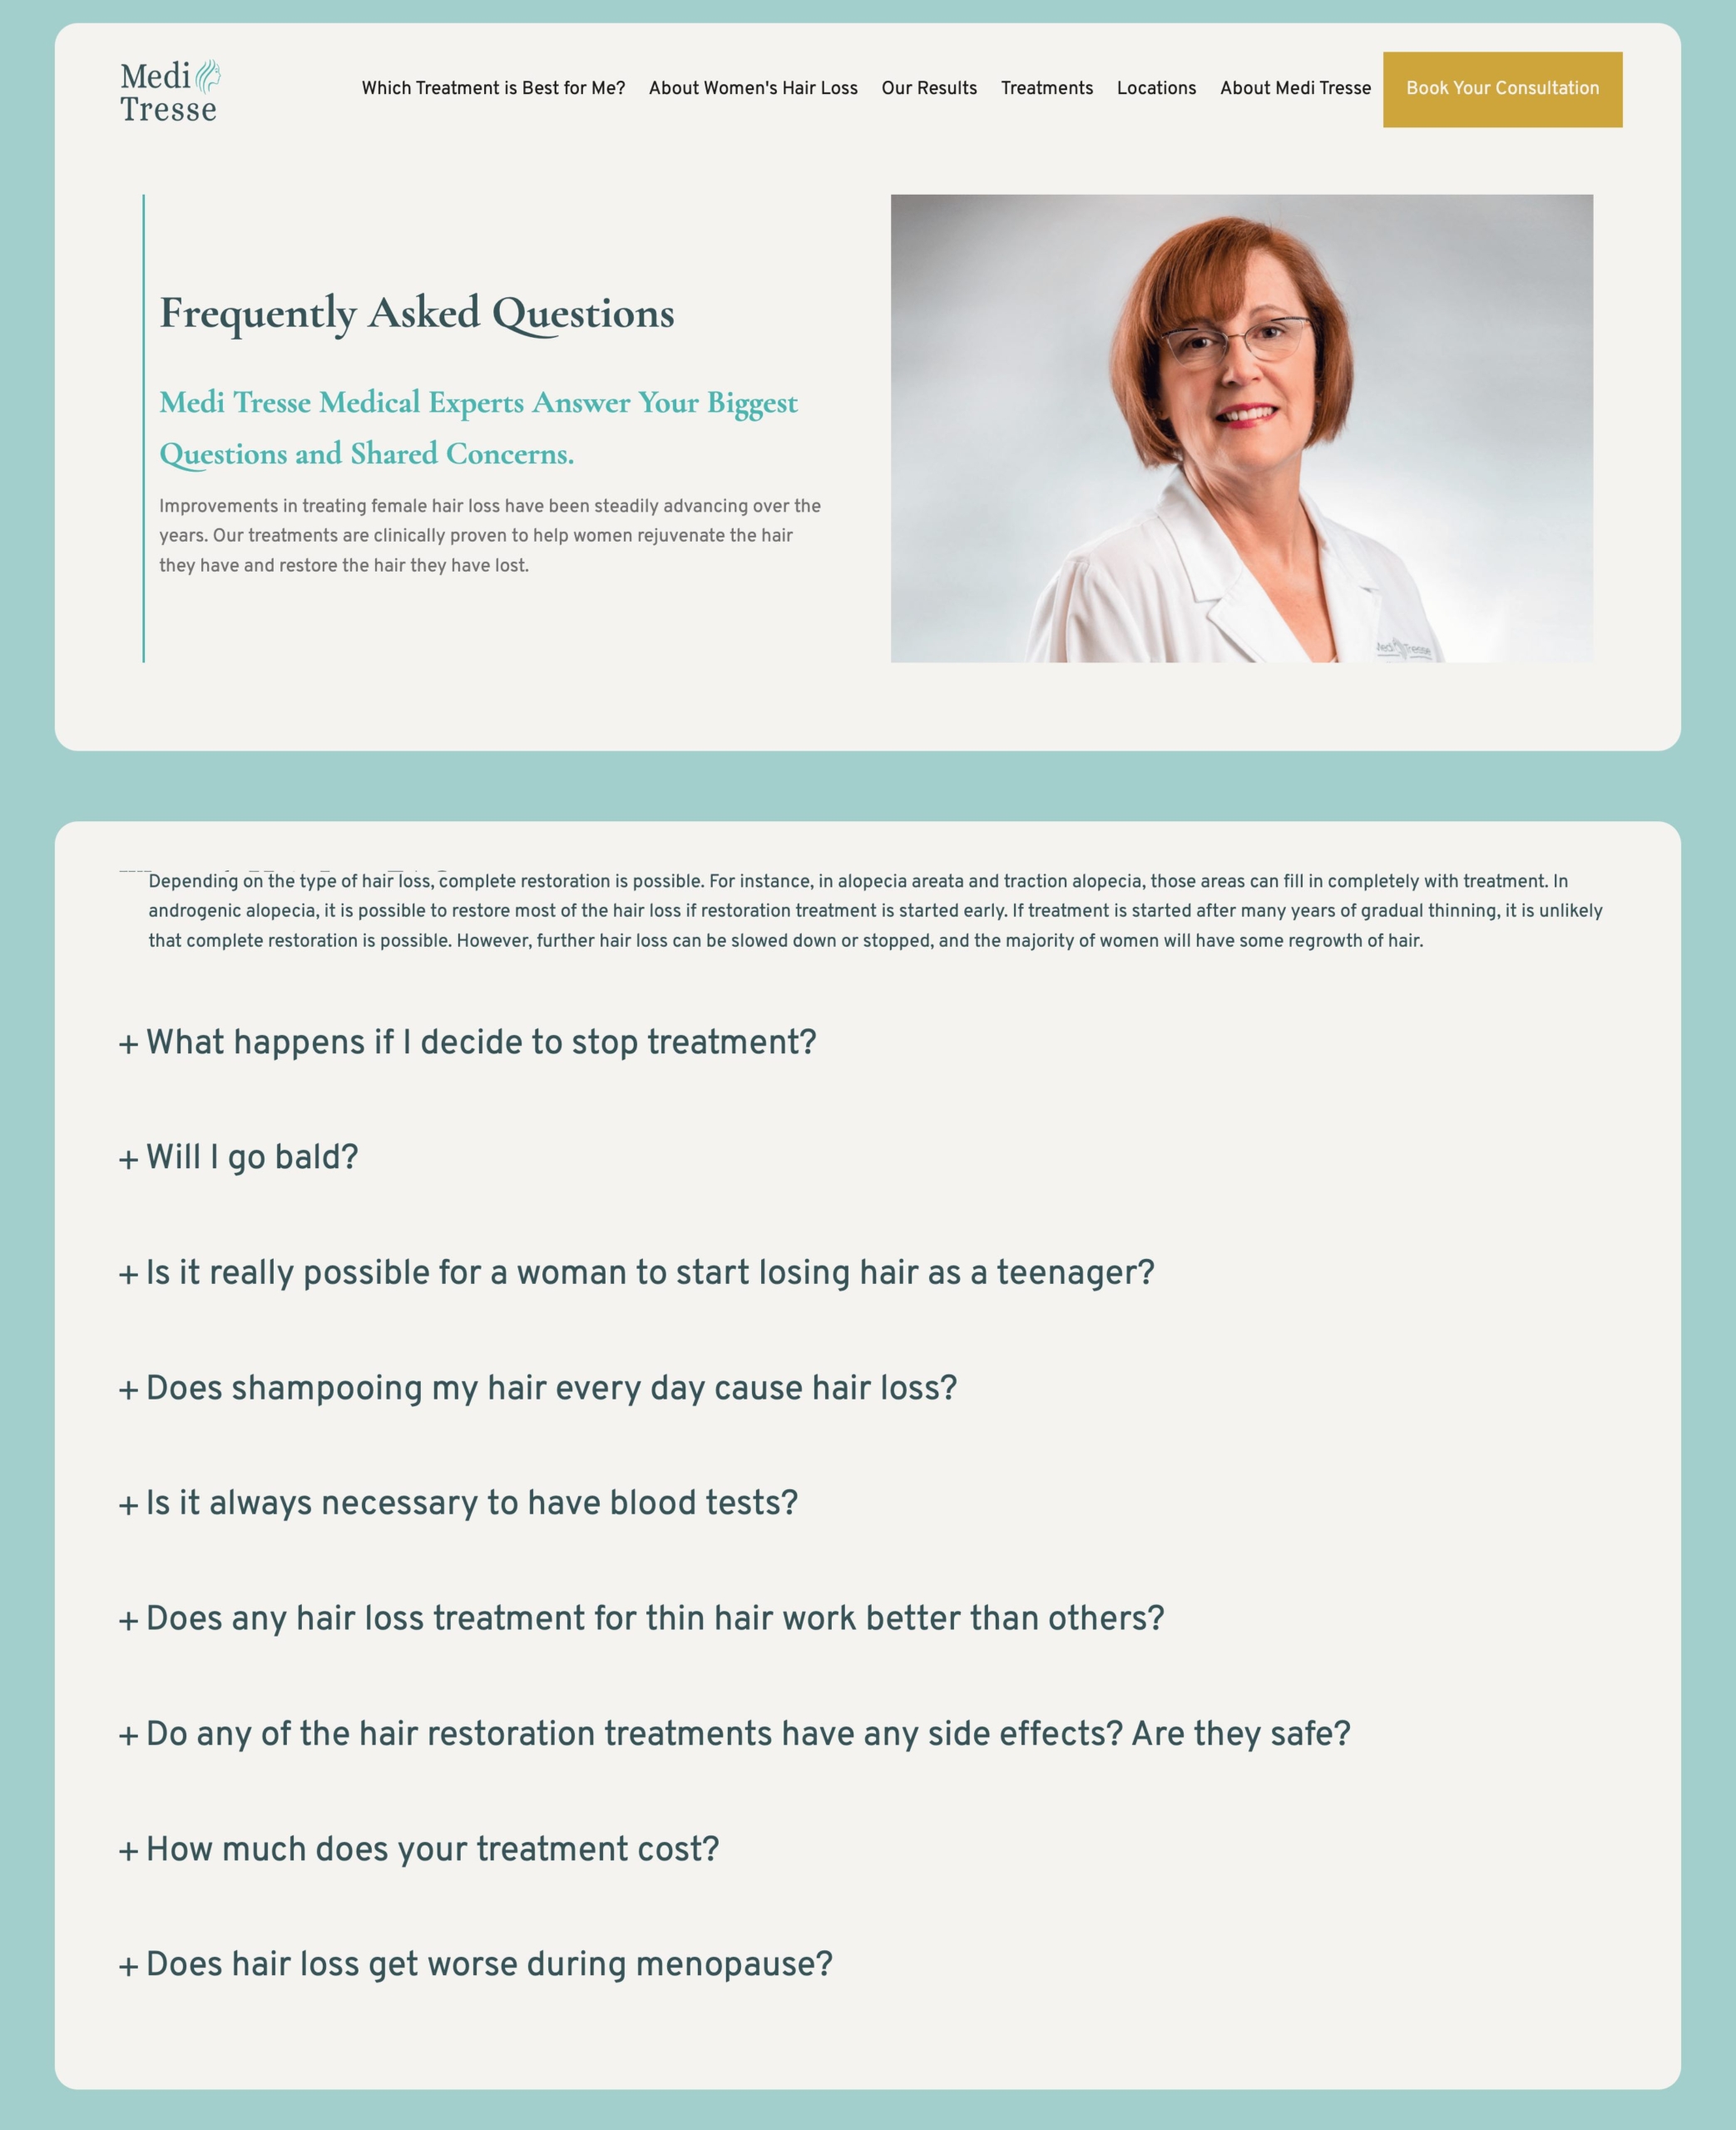 Medi Tresse Medical Experts Answer Your Biggest Questions and Shared Concerns.